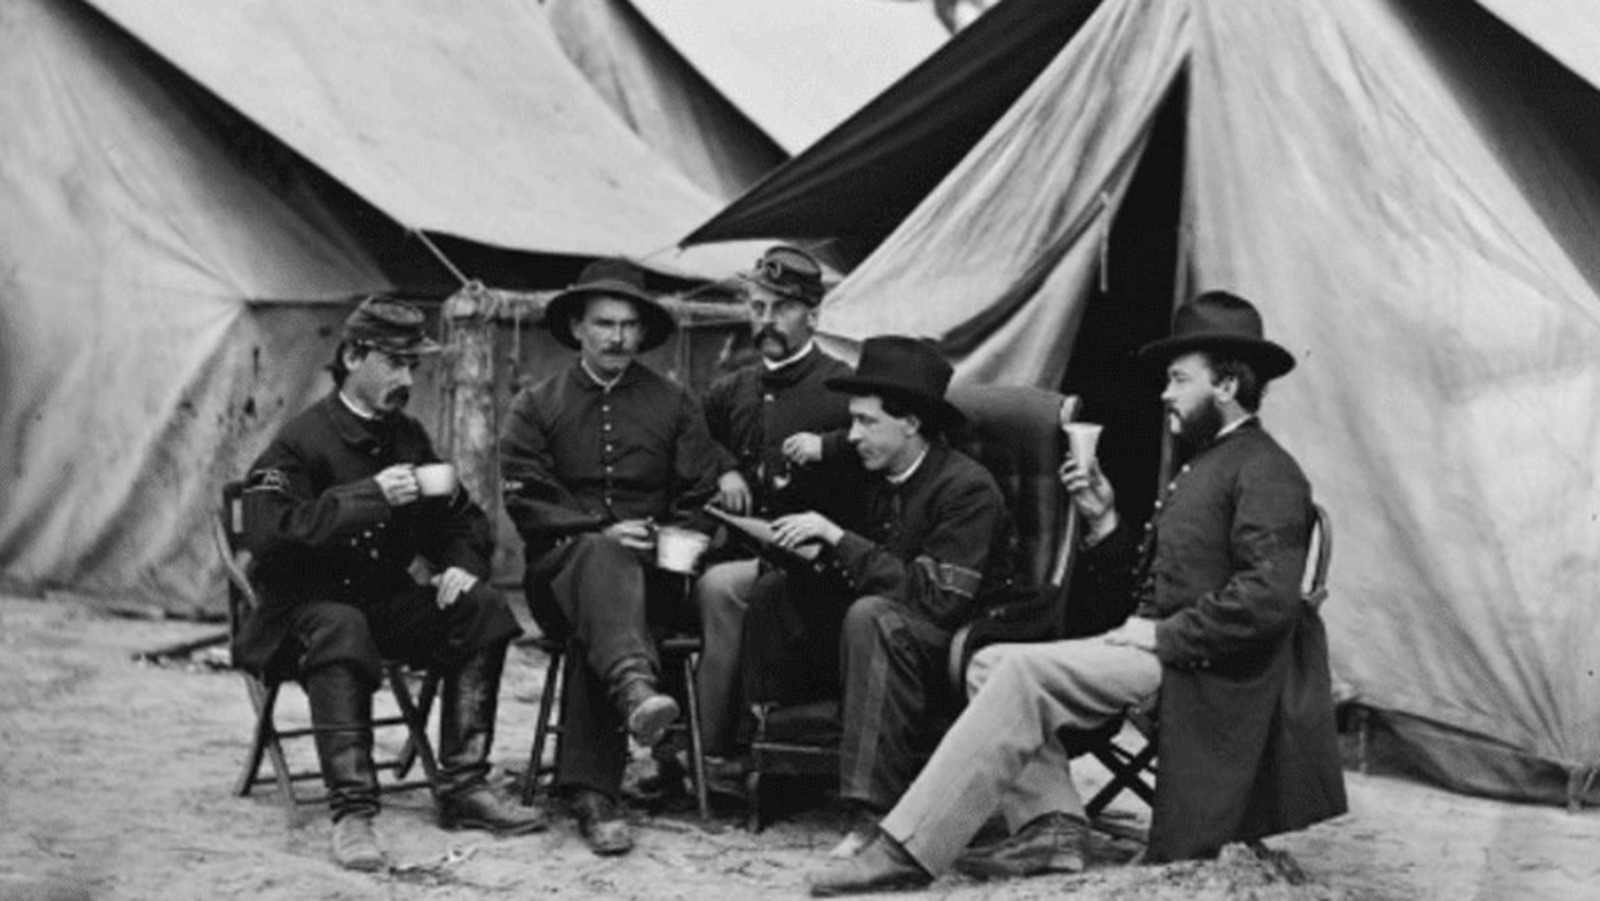 Men o' War Tent - I would guess the production referred to in this